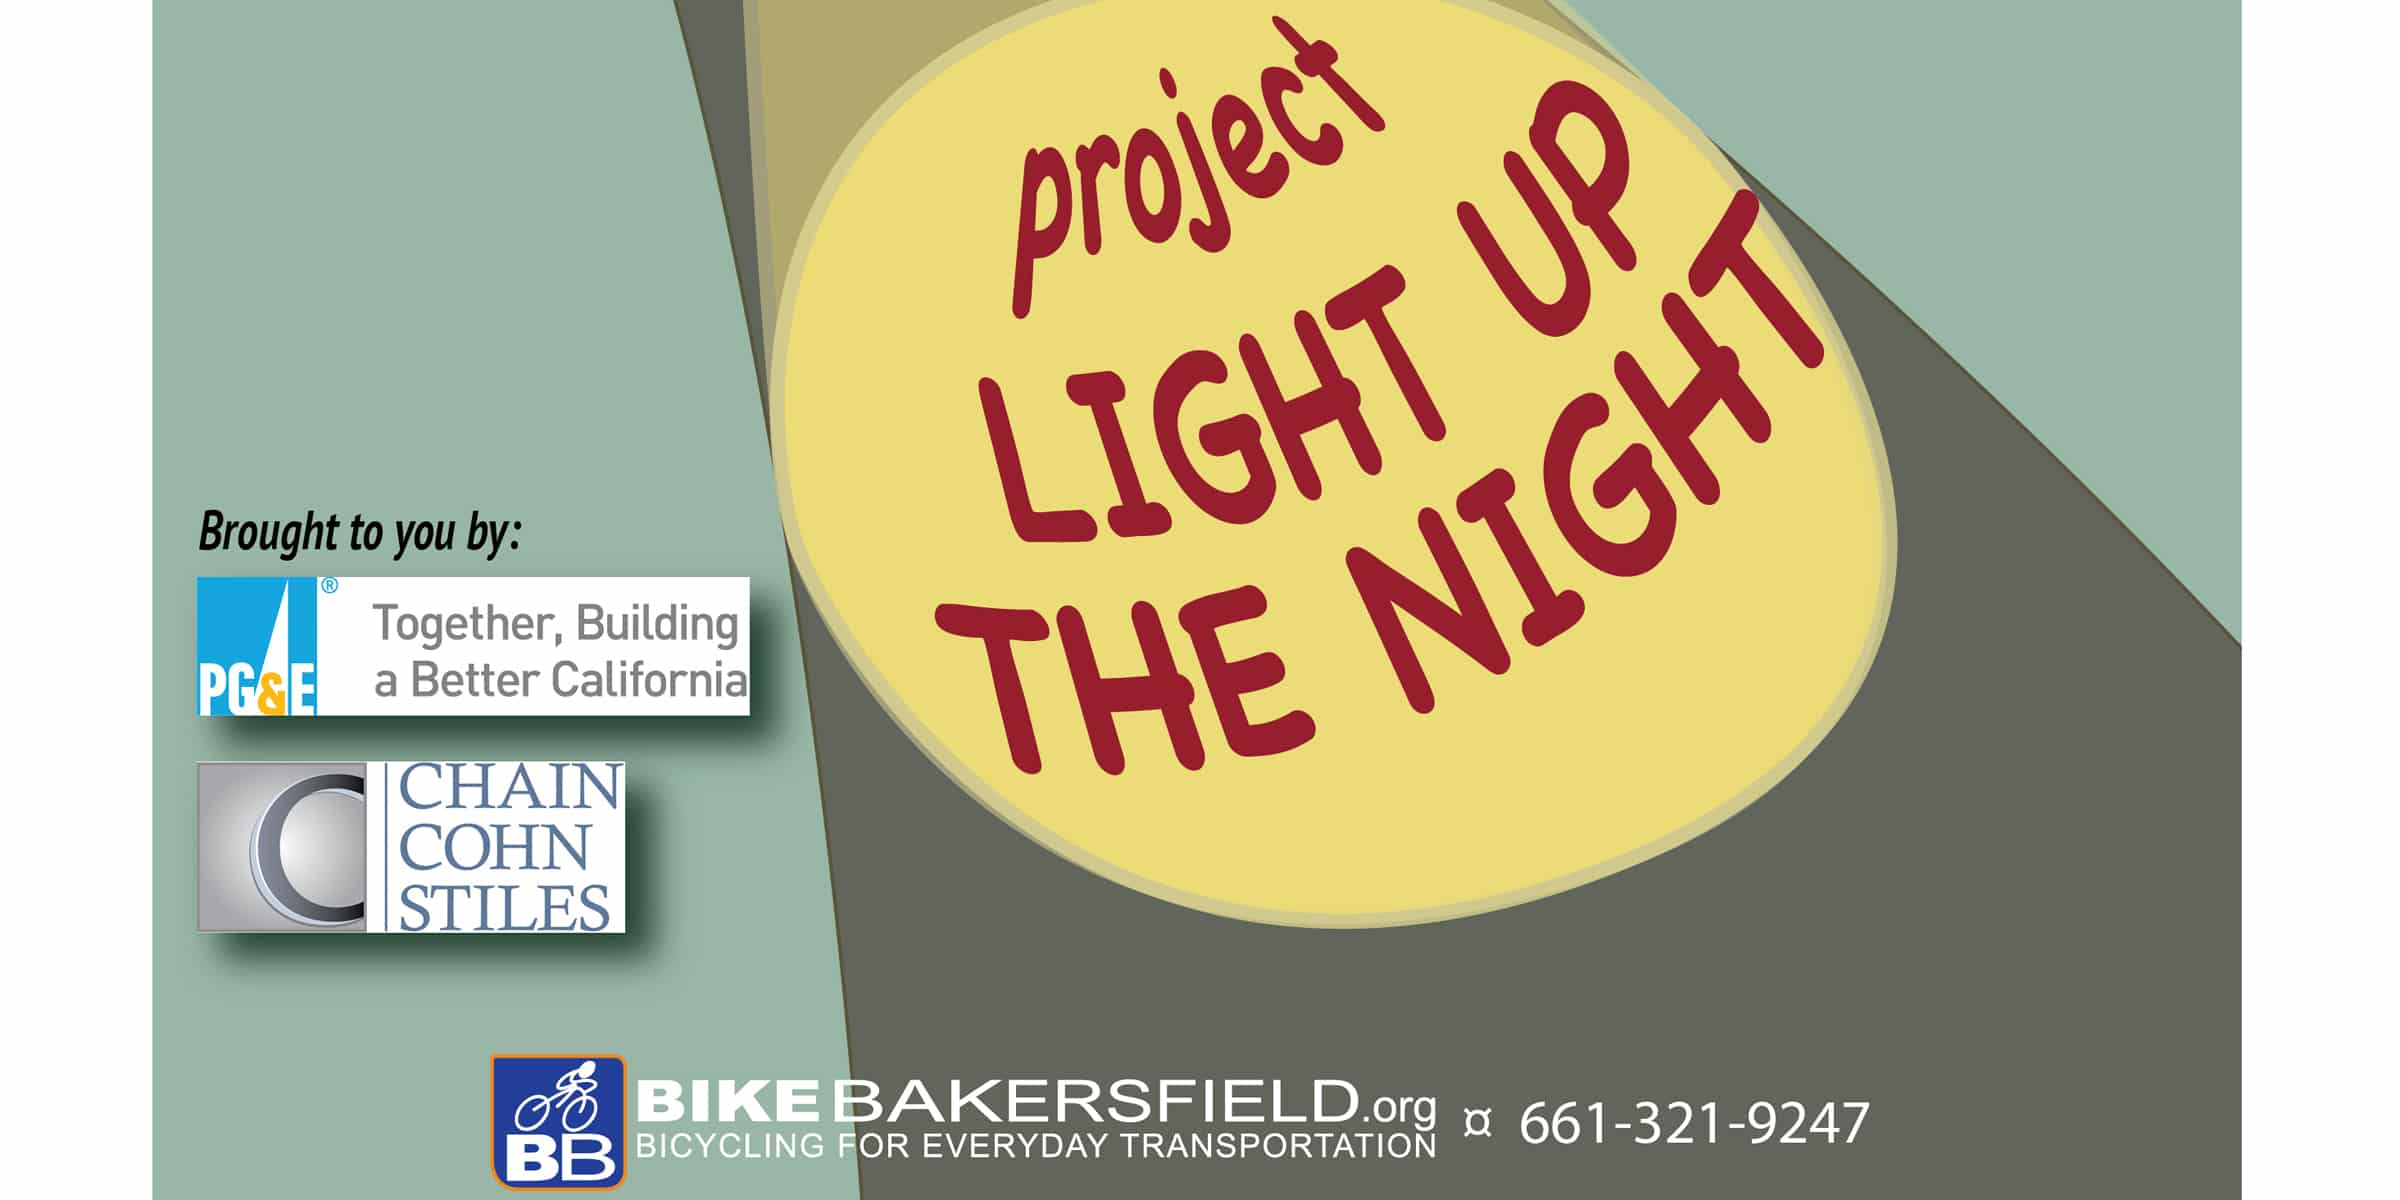 Chain | Cohn | Clark-sponsored ‘Project Light Up The Night’ focuses on bicycle safety